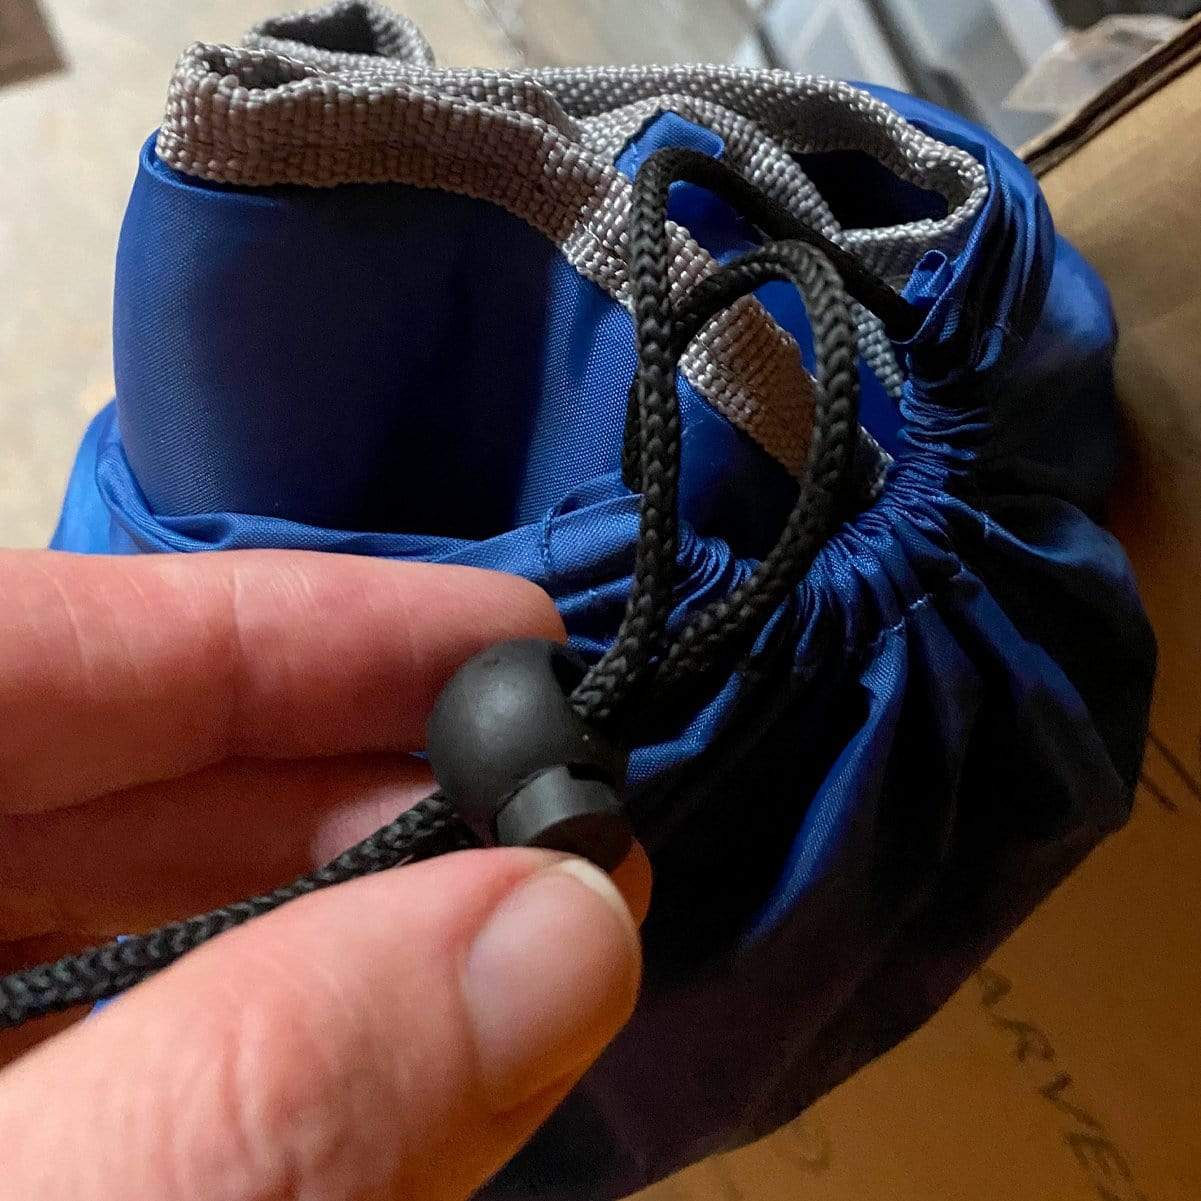 A hand is adjusting an Adjustable Cord Lock - Round Ball Style - Single Hole End Toggle for DIY Projects (2135-4001) on a blue fabric bag with grey accents.